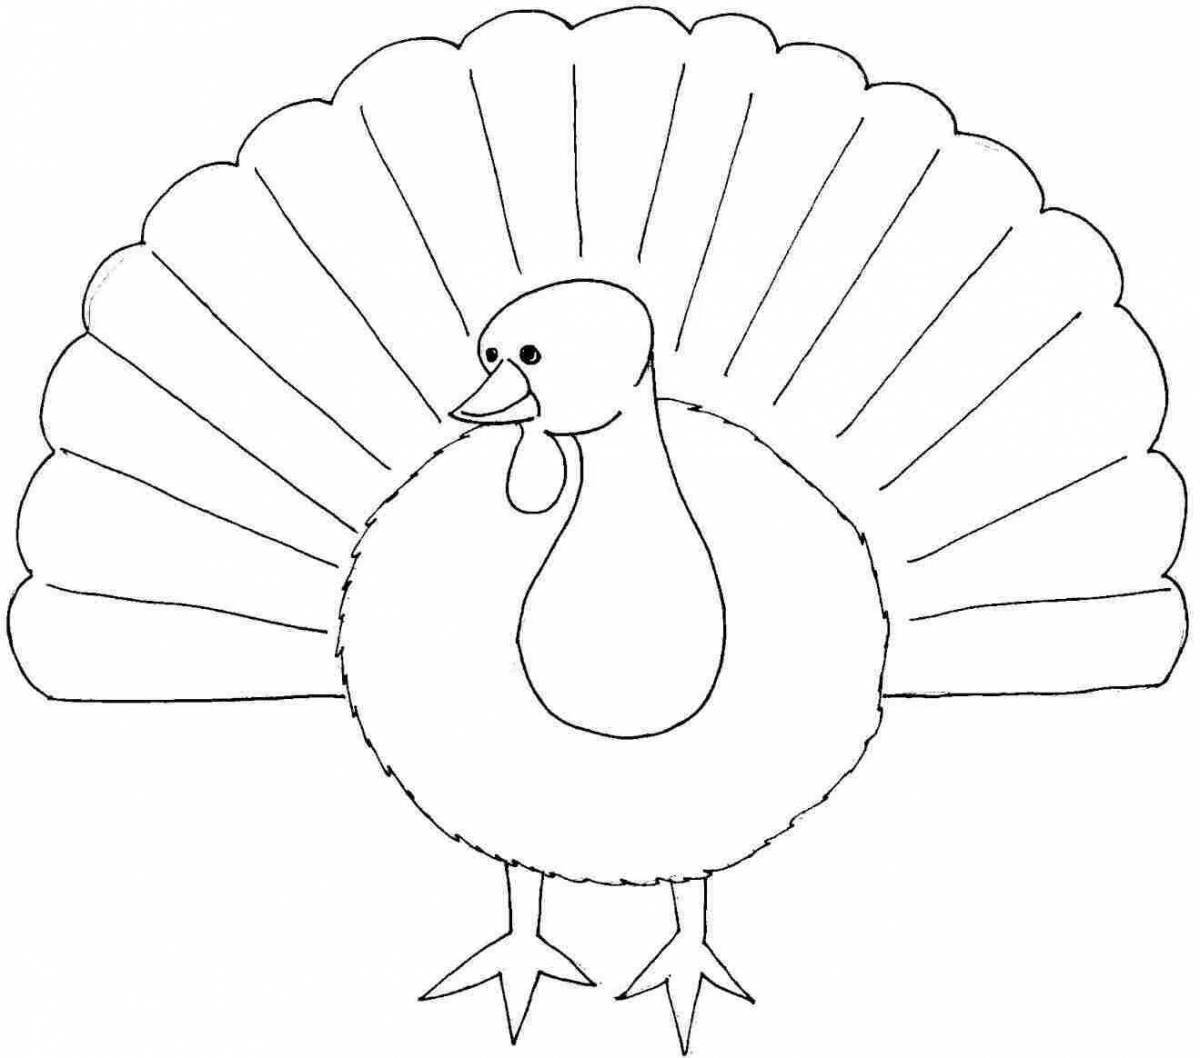 Glorious Dymkovo turkey coloring pages for kids